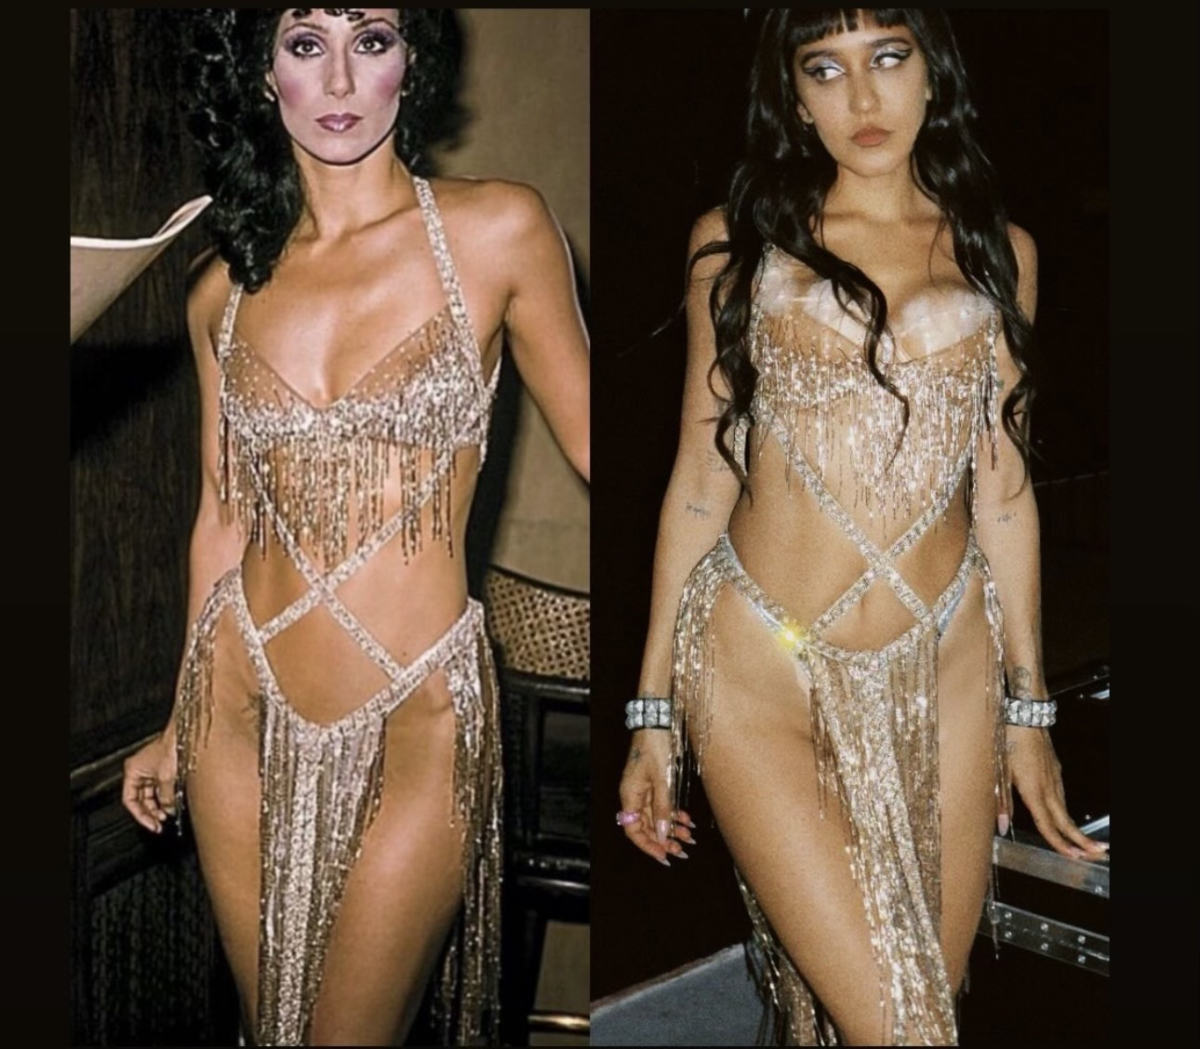 Jesse Jo Stark Ushers In The New Year In Vintage Bob Mackie From Cher’s Personal Archive